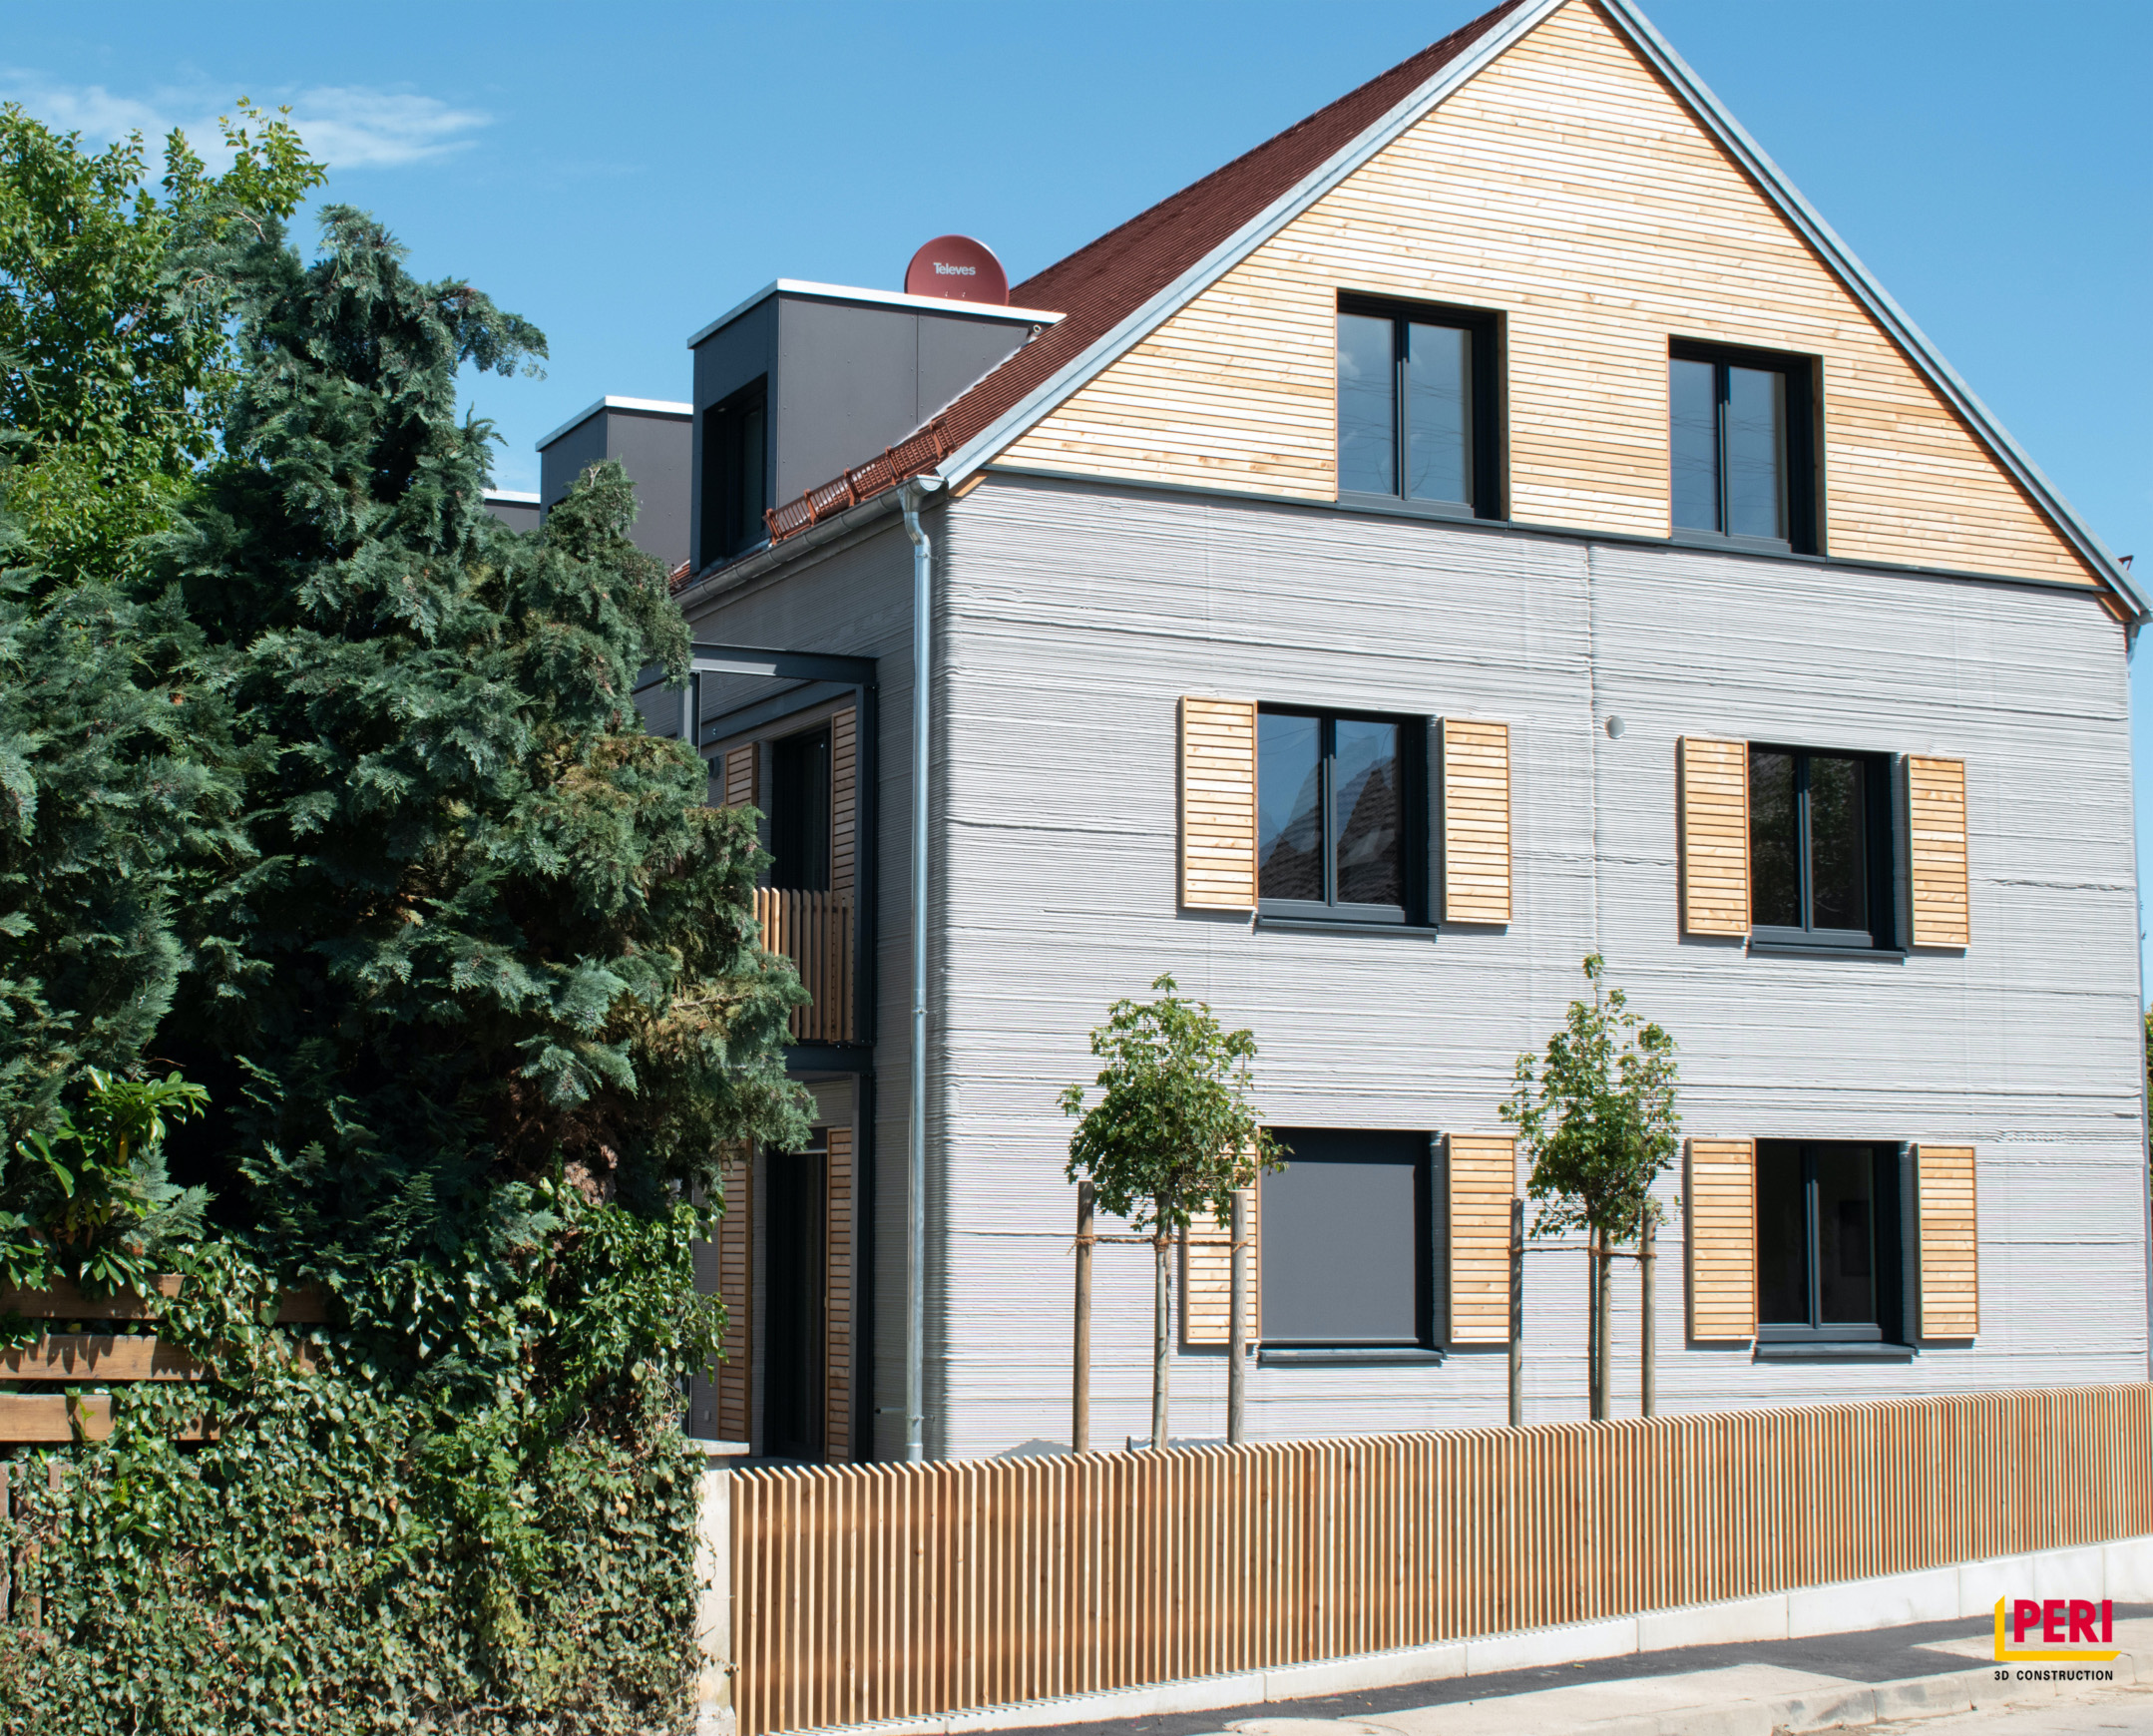 Europe’s first 3D printed three-story residential building, printed using COBOD’s 3D-construction printer BOD2